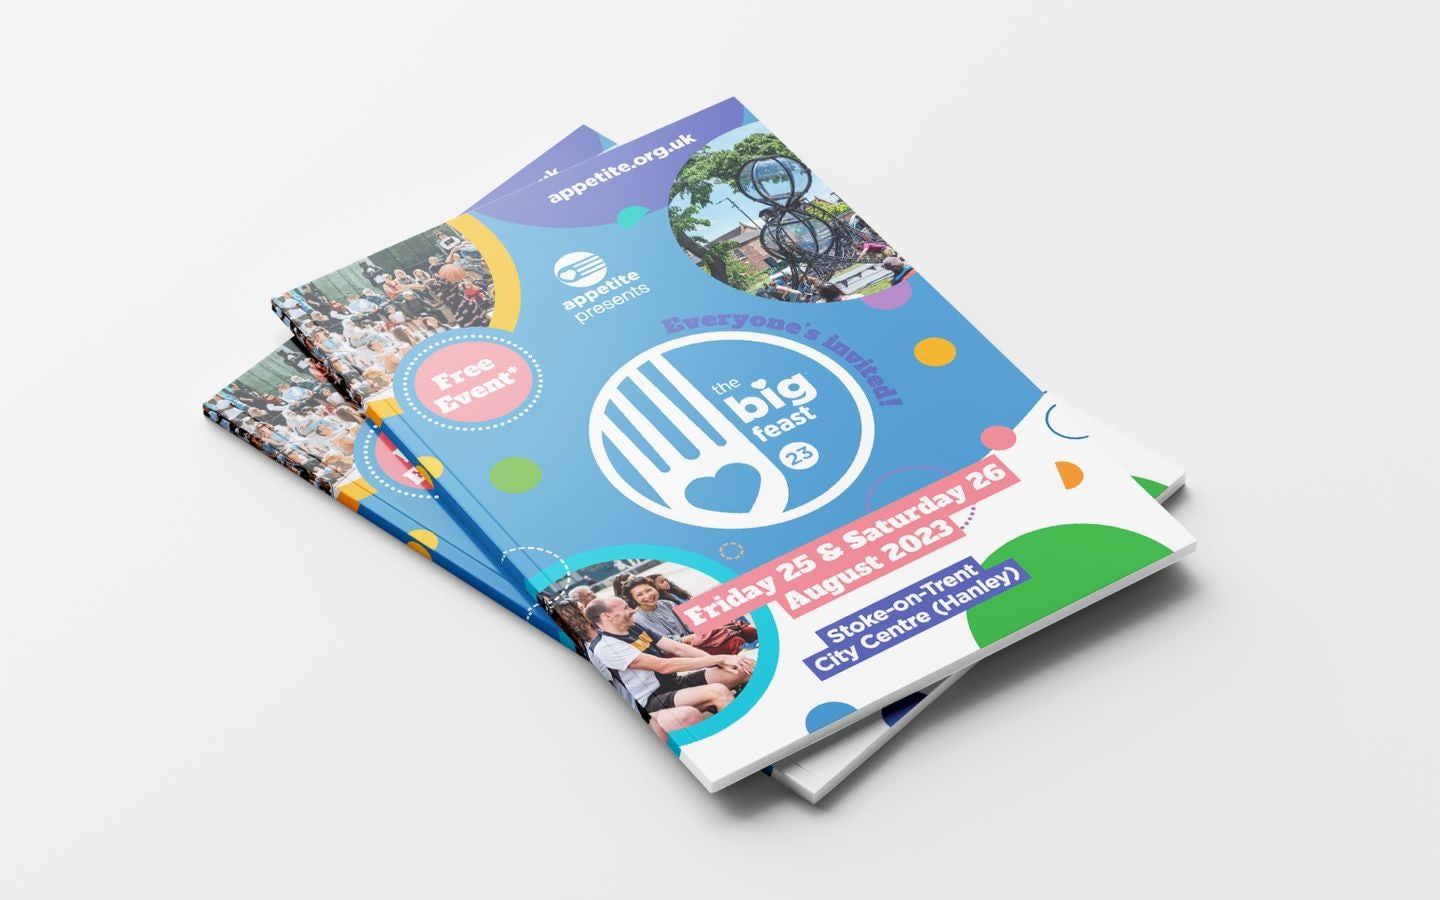 Mockup of The Big Feast 2023 Appetite brochure on a white background.